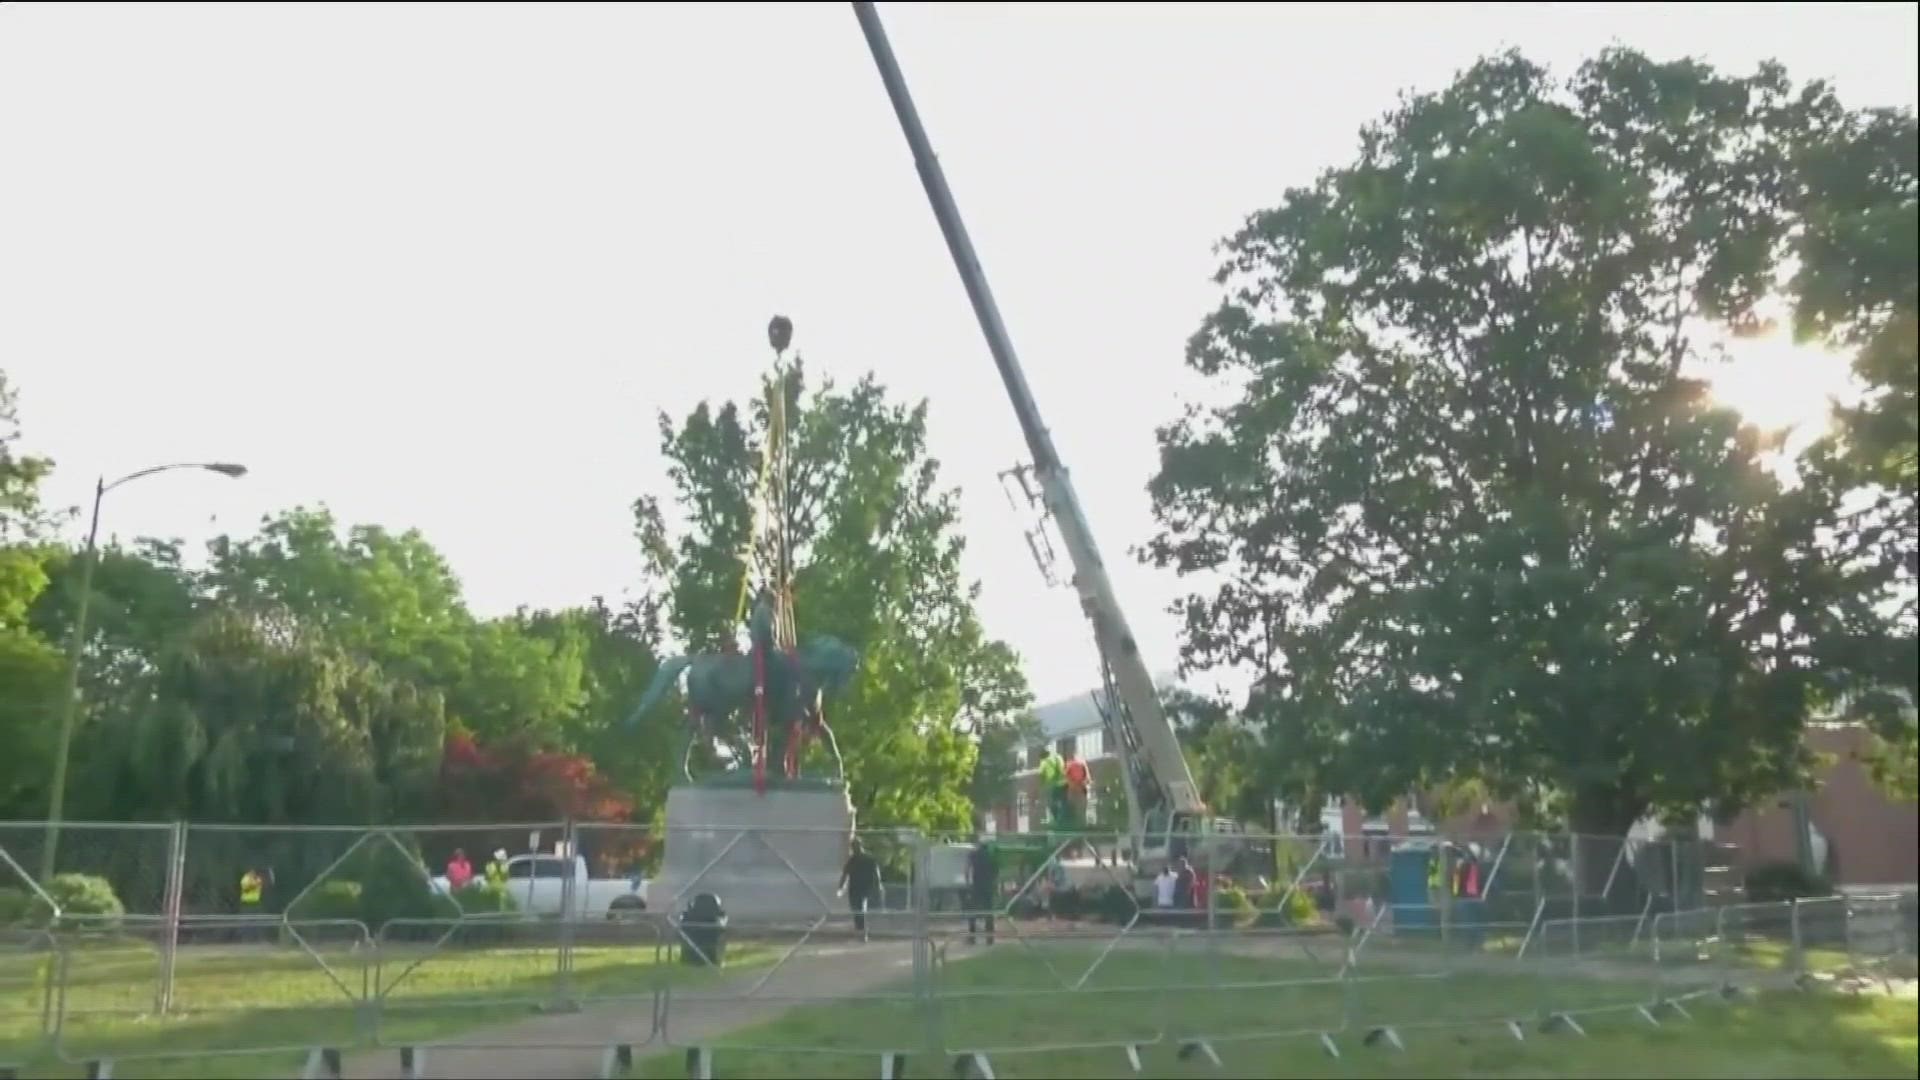 Robert E. Lee statue comes down. It's a Confederate monument that helped spark a violent white supremacist rally in Charlottesville, VA.